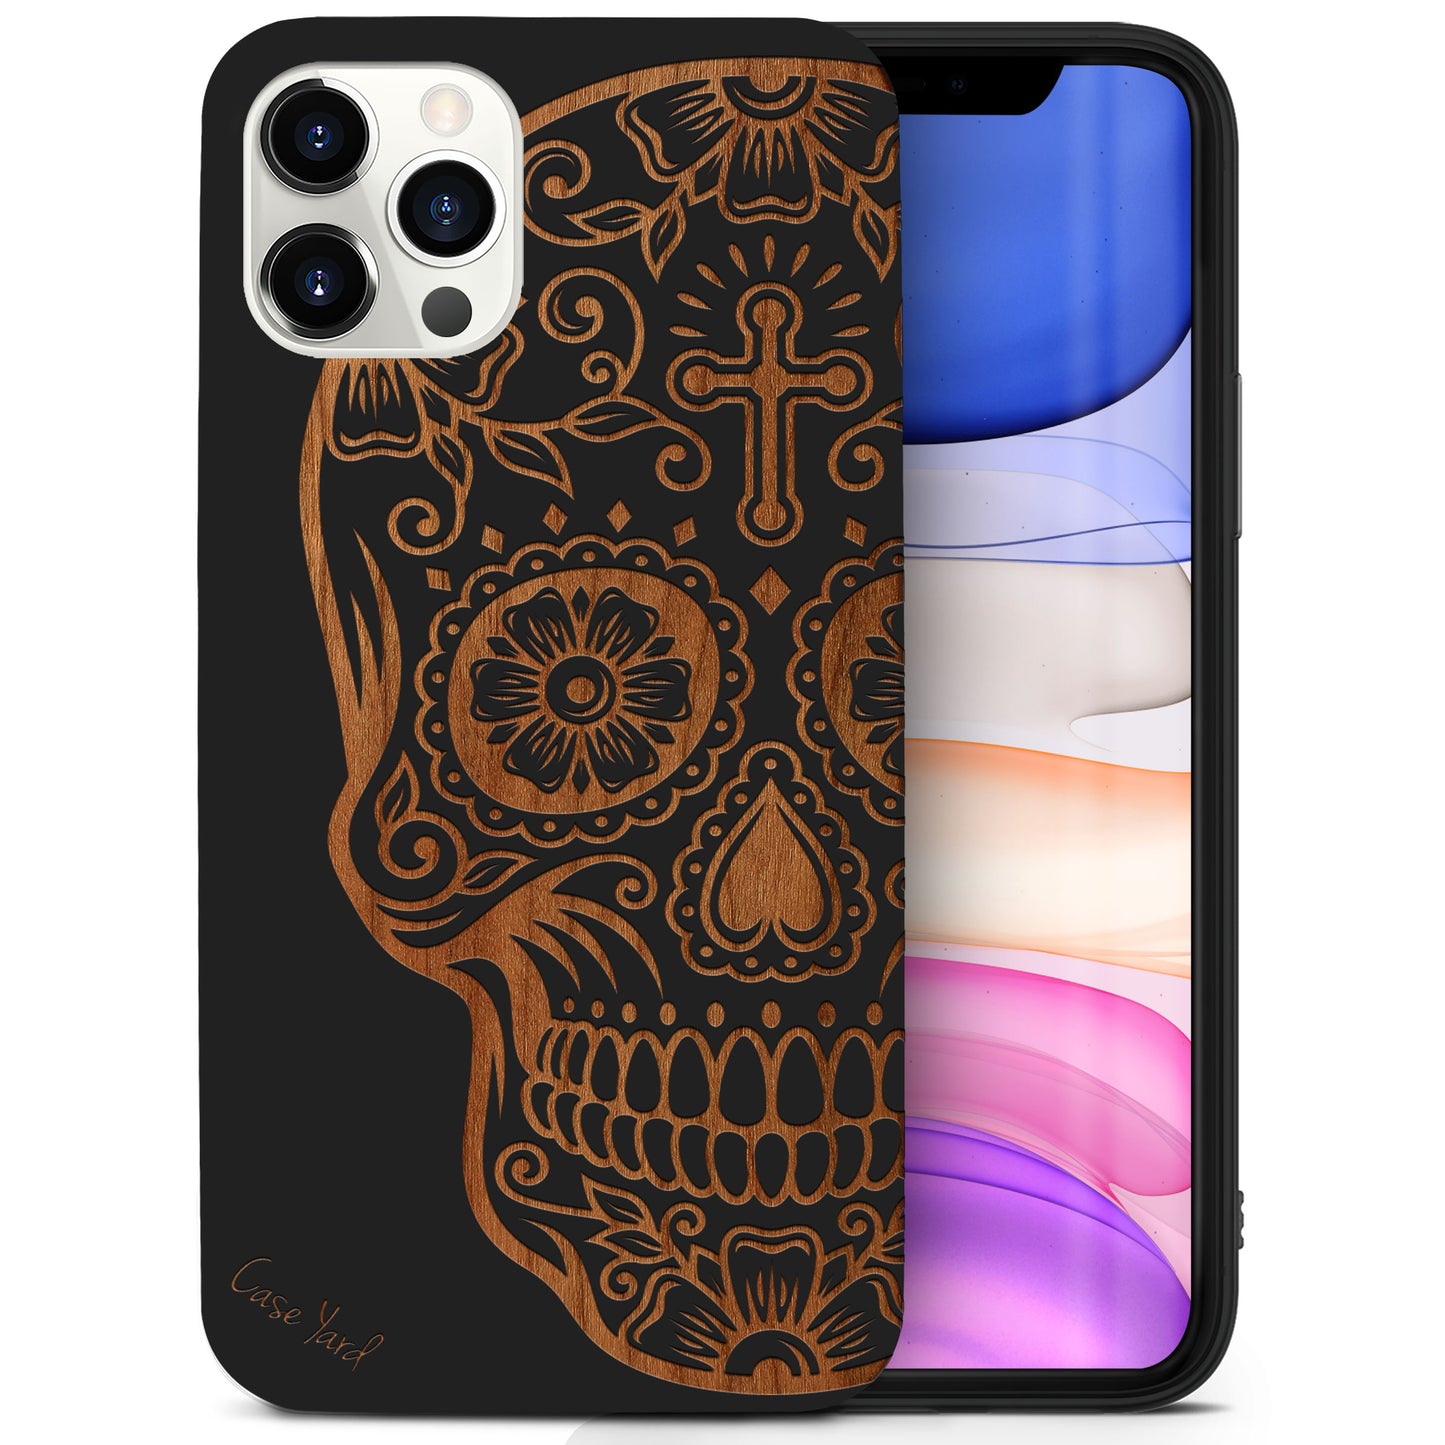 Wooden Cell Phone Case Cover, Laser Engraved case for iPhone & Samsung phone Cross Skull Design